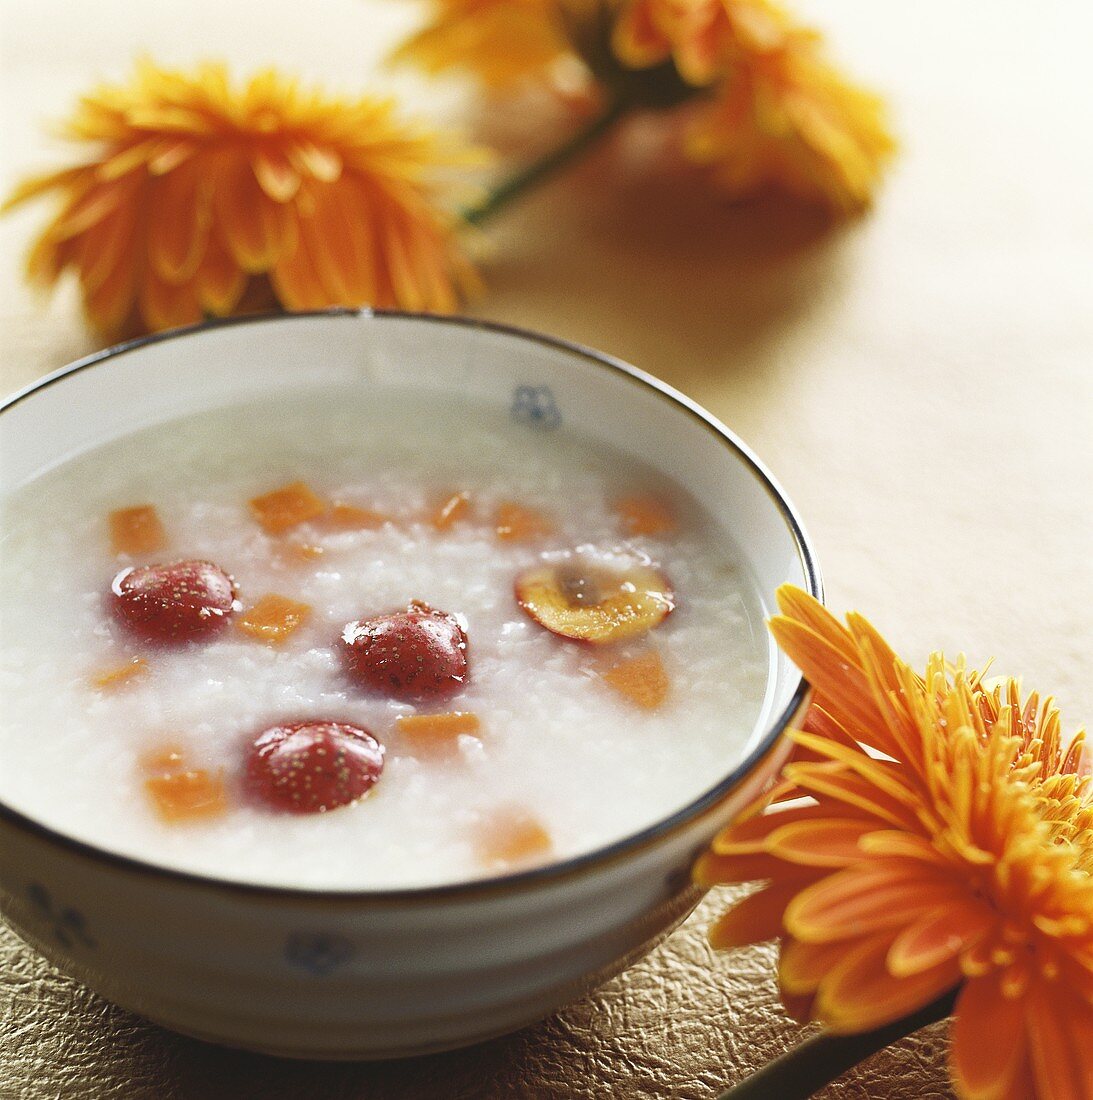 Rice porridge with dates and carrot